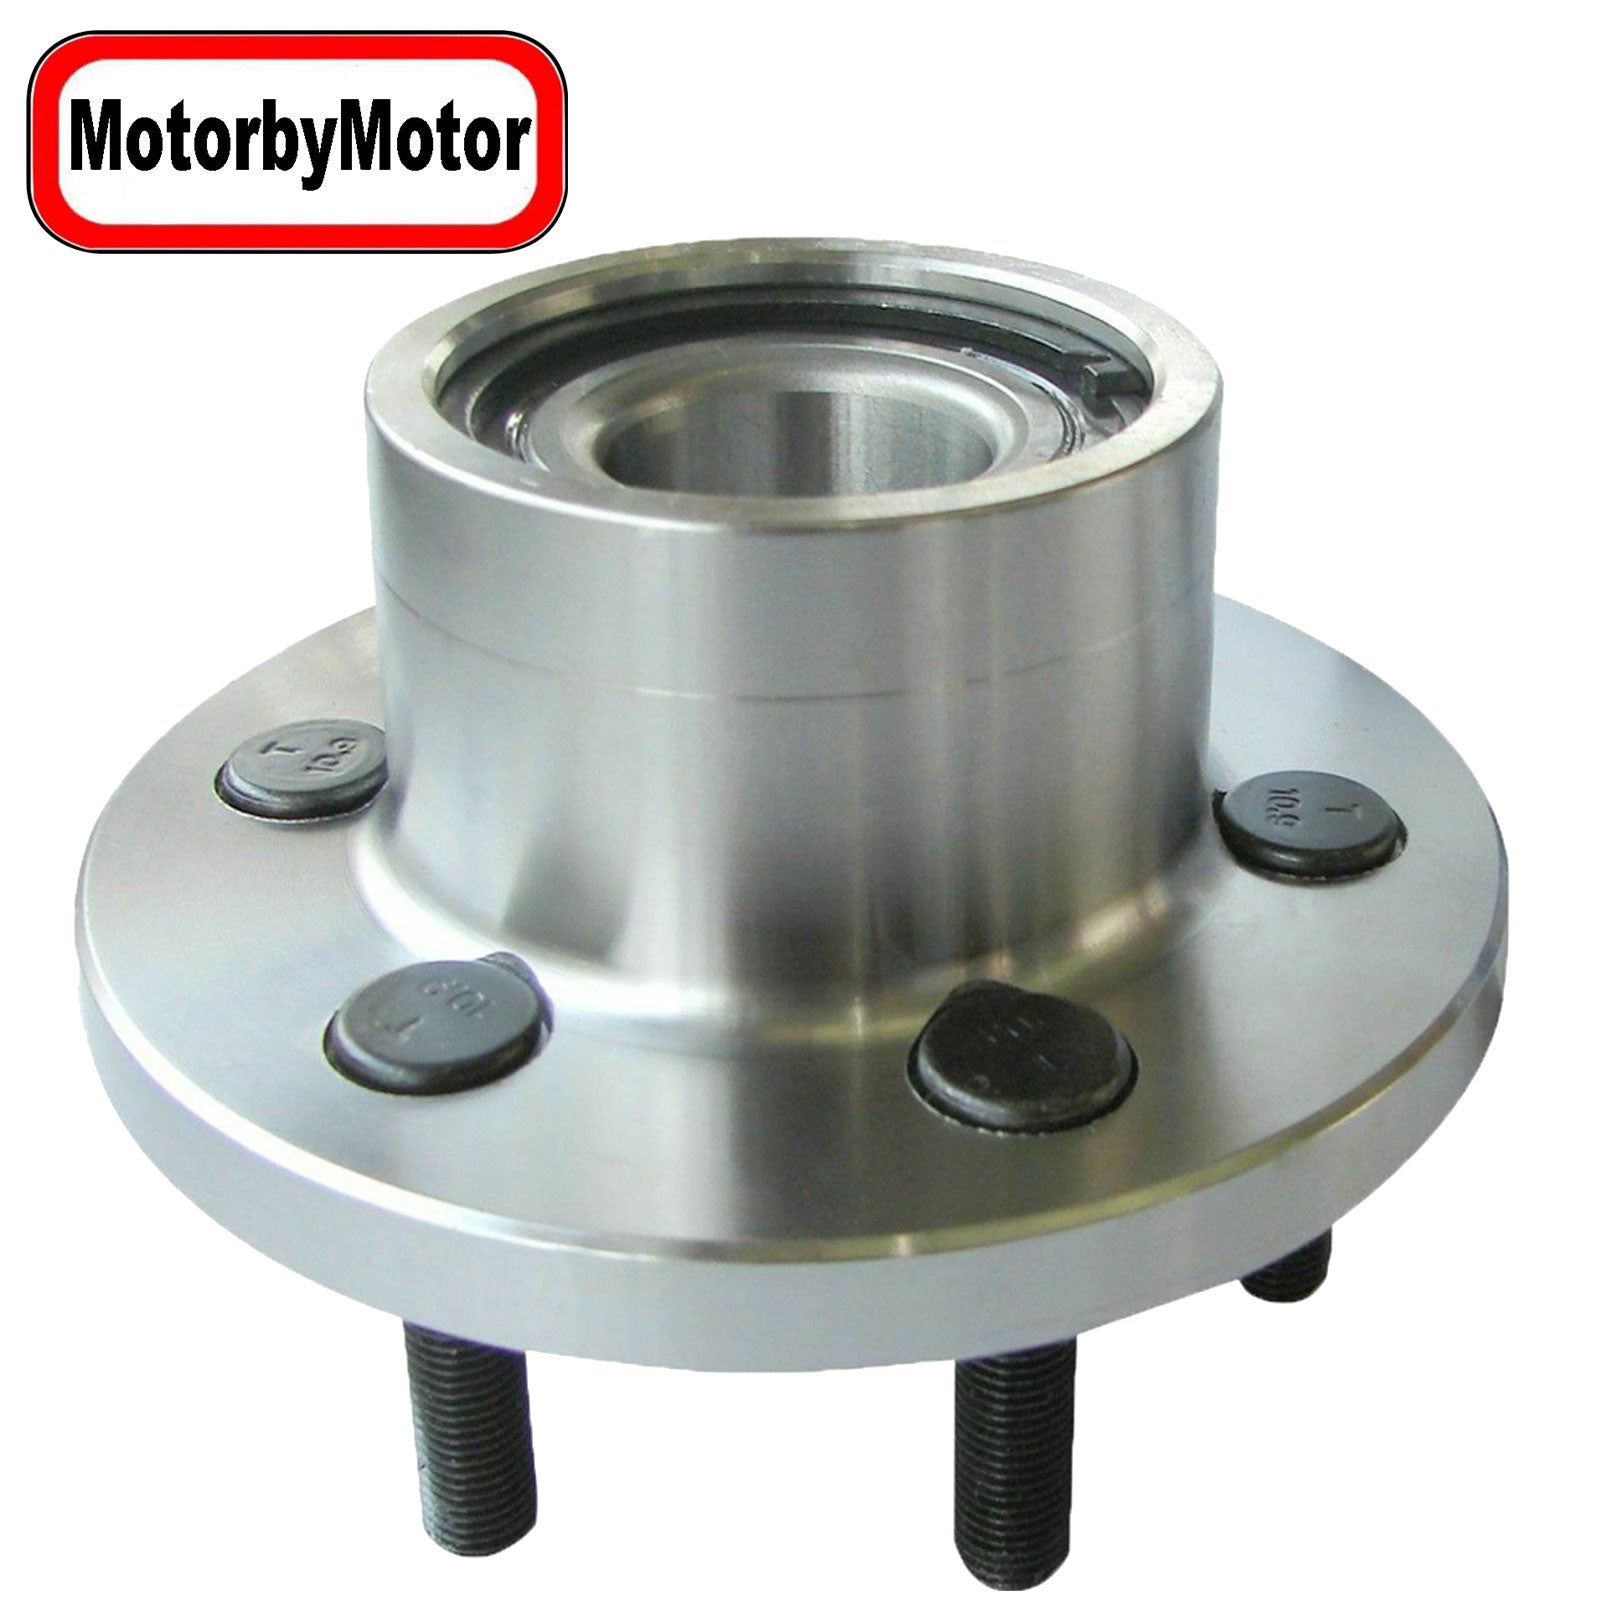 MotorbyMotor 515032 Front Wheel Bearing and Hub Assembly 2WD with 6 Lugs Fits for 1999-2003 Dodge Durango, 1997-2004 Dodge Dakota Hub Bearing (2WD RWD, w/2-Wheel ABS)-2PK MotorbyMotor